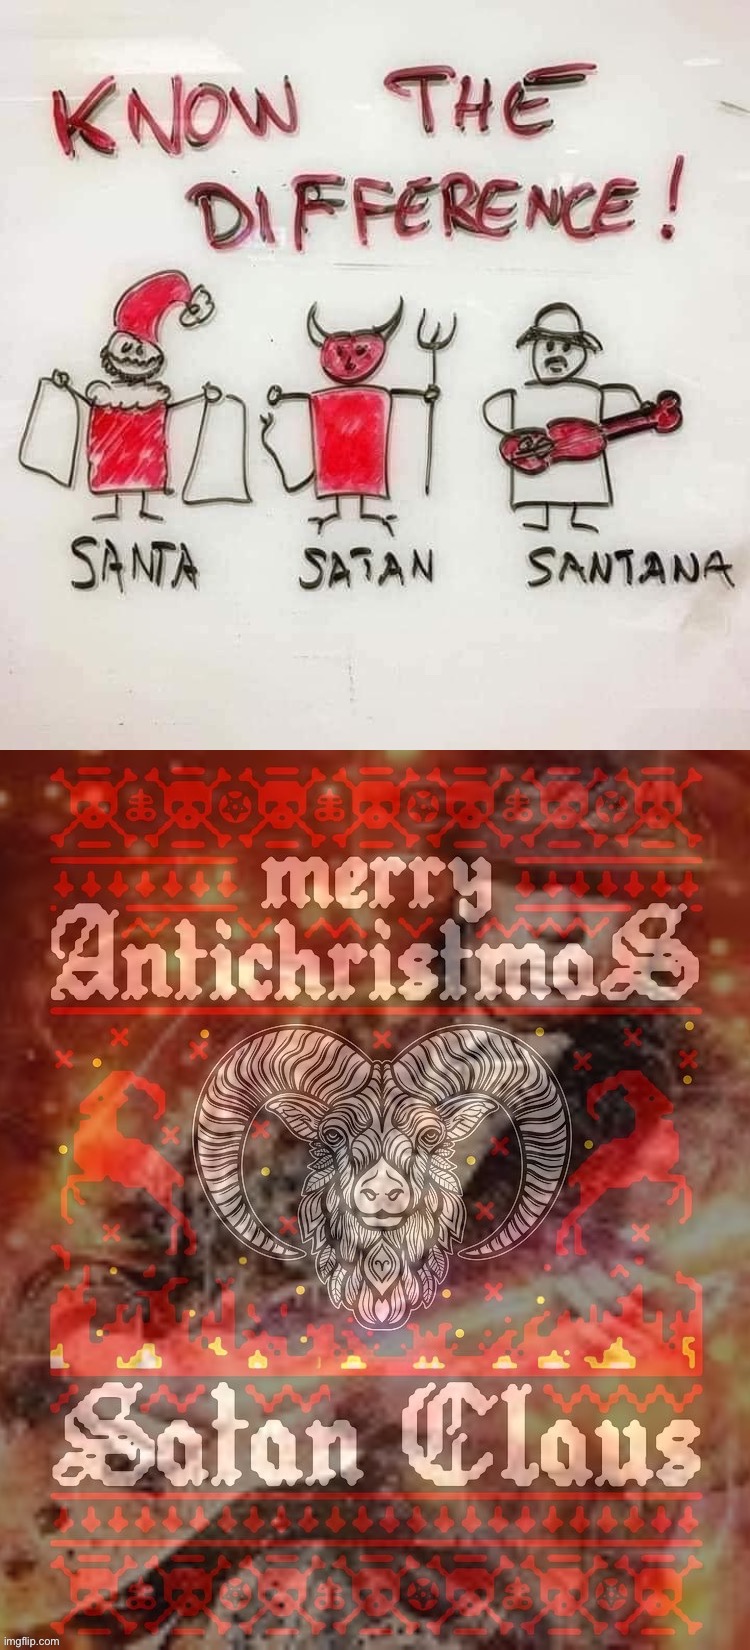 Carlos Satanta | image tagged in know the difference santa satan santana,satan,santa,santana,know the difference,no | made w/ Imgflip meme maker